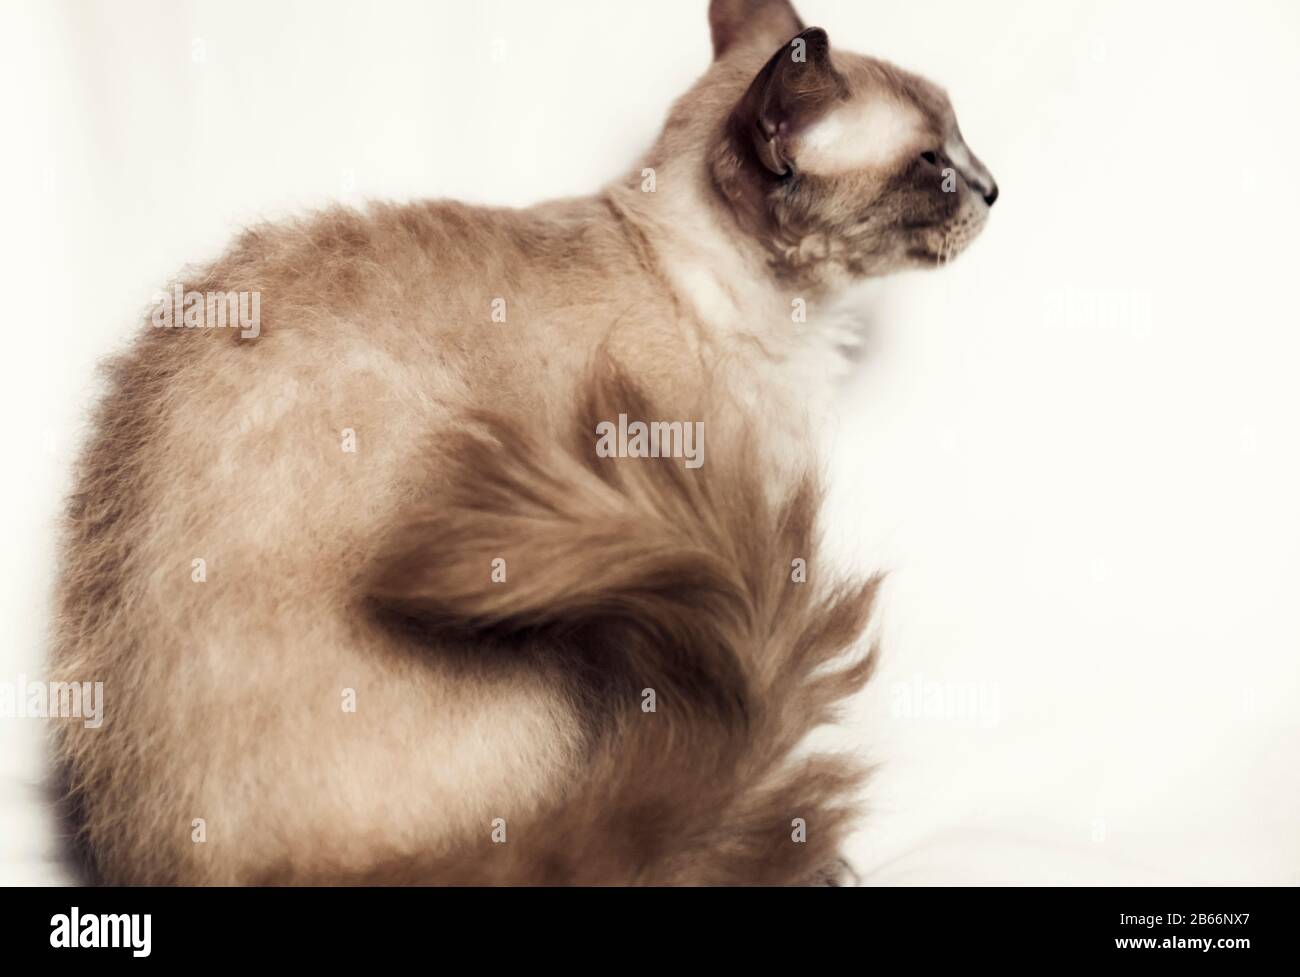 Profile of a mocha La Perm cat with a long-haired tail Stock Photo